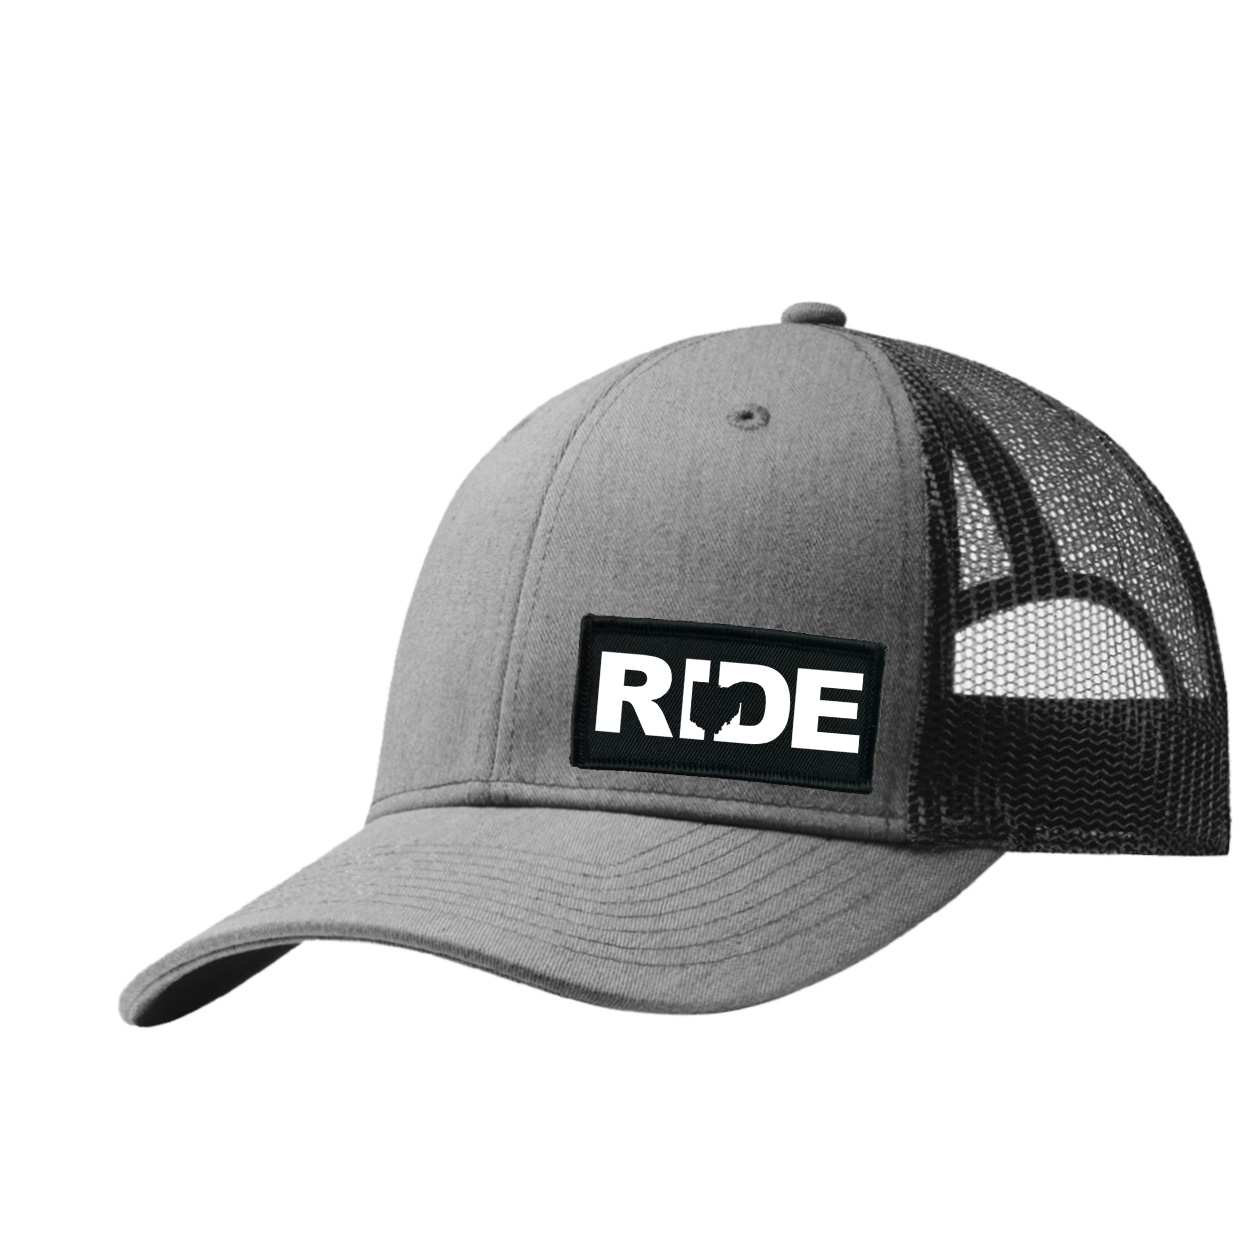 Ride Ohio Night Out Woven Patch Snapback Trucker Hat Heather Gray/Black (White Logo)